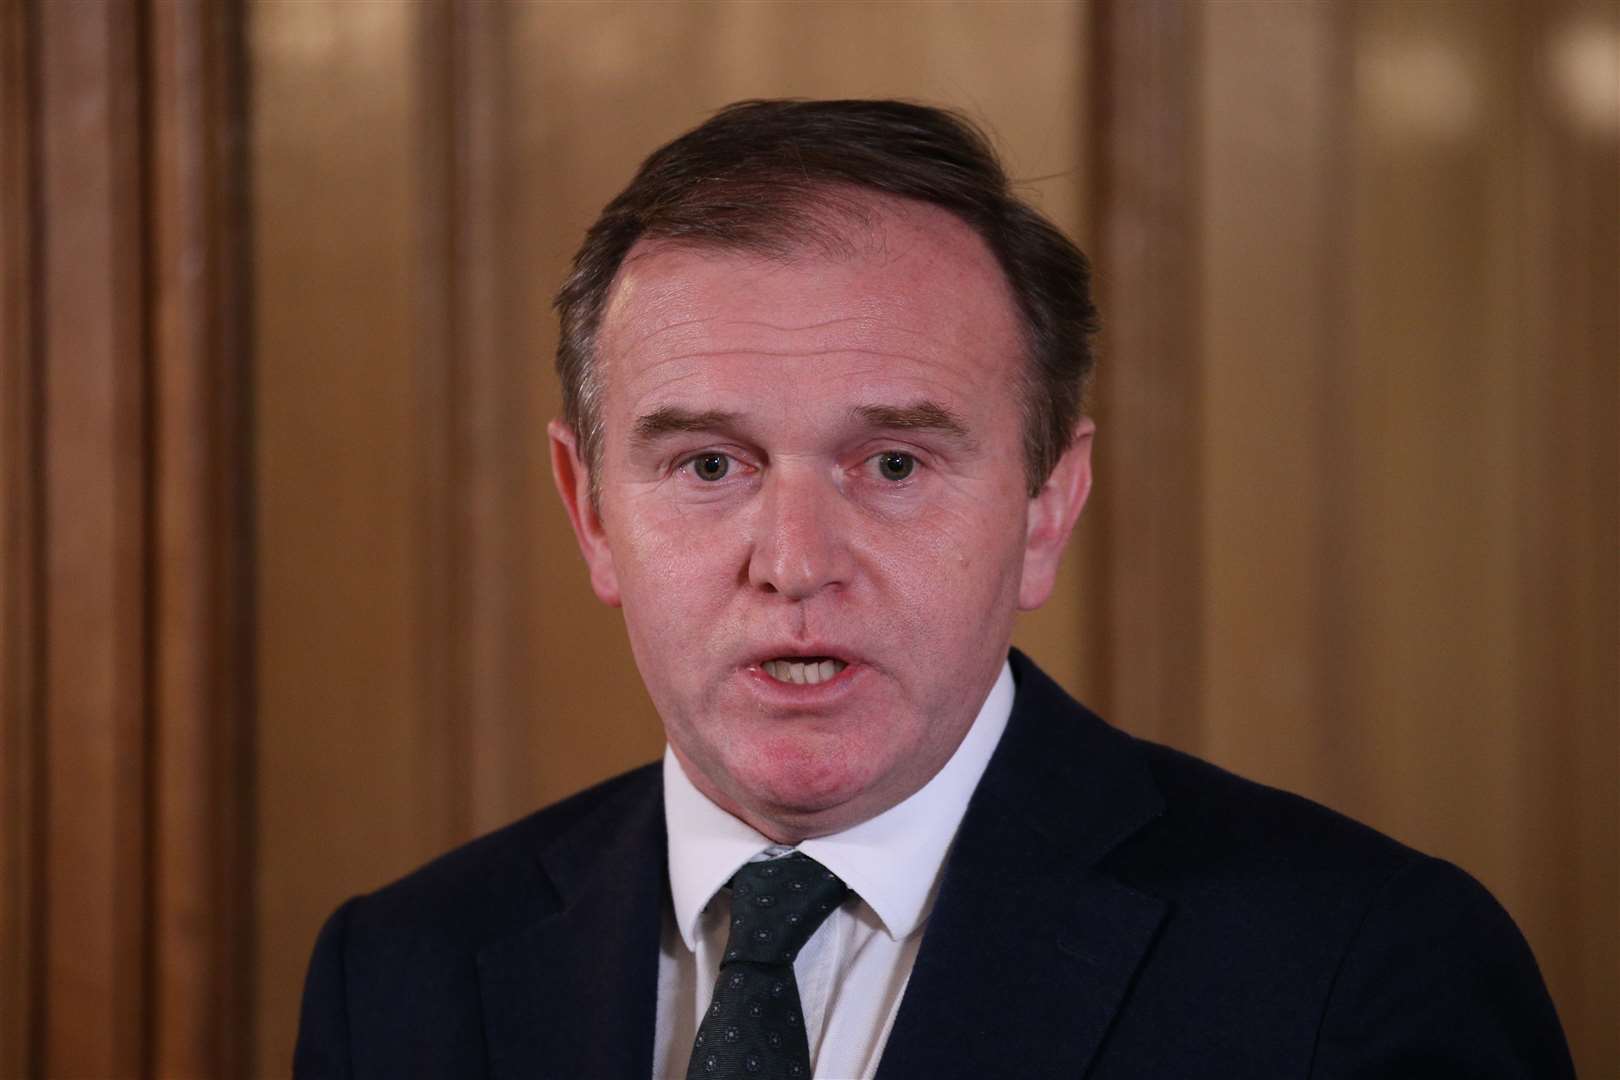 Environment Secretary George Eustice said the Government had given assurances to the NFU about maintaining standards (Jonathan Brady/PA)